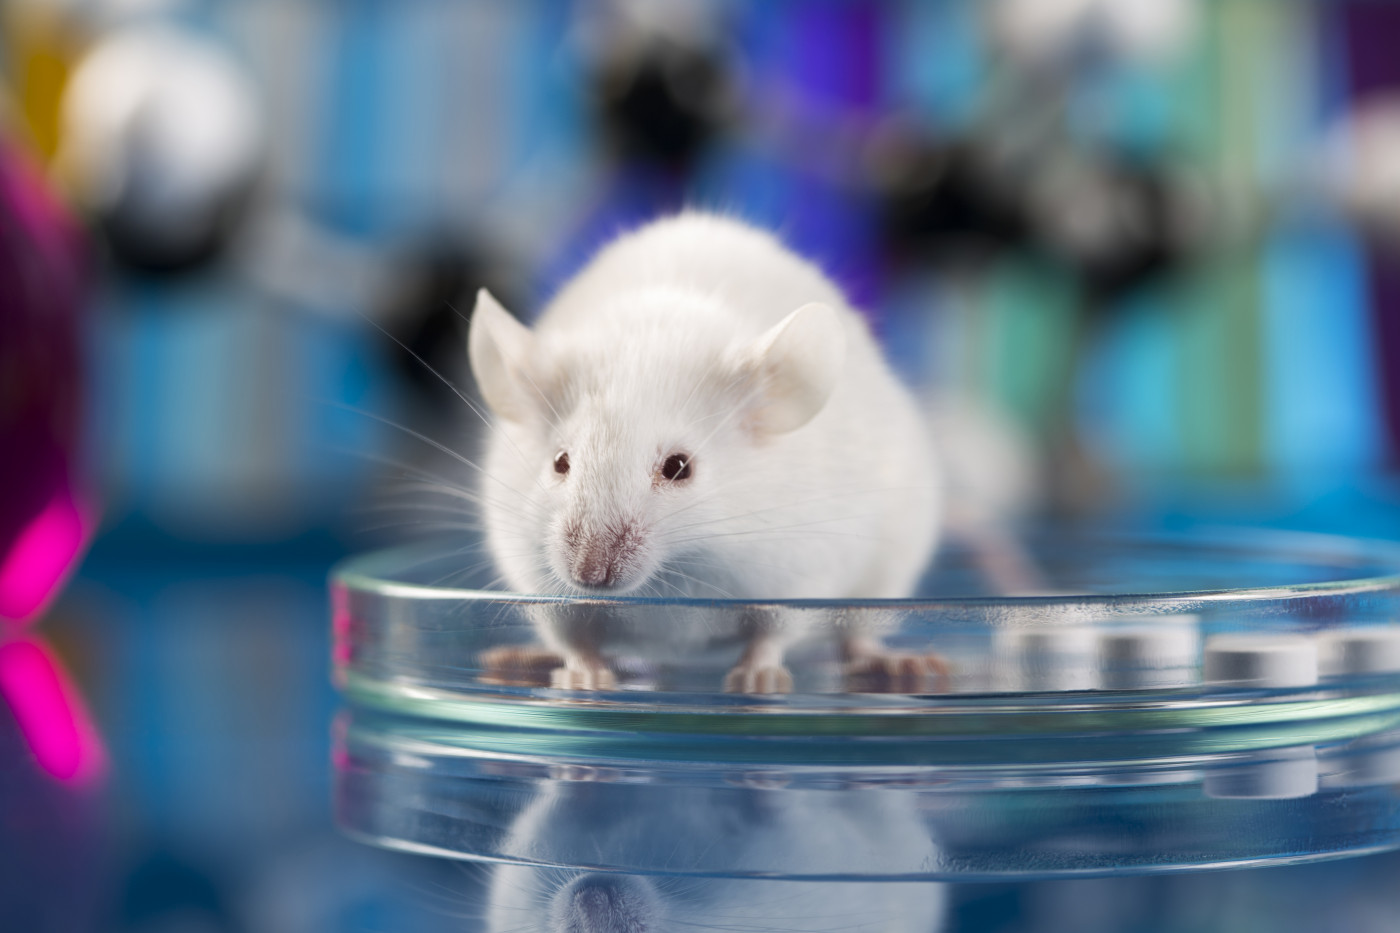 Specific Stem Cells Promote Motor Neuron Survival, Increase Muscle Strength in ALS Mouse Model, Study Reports